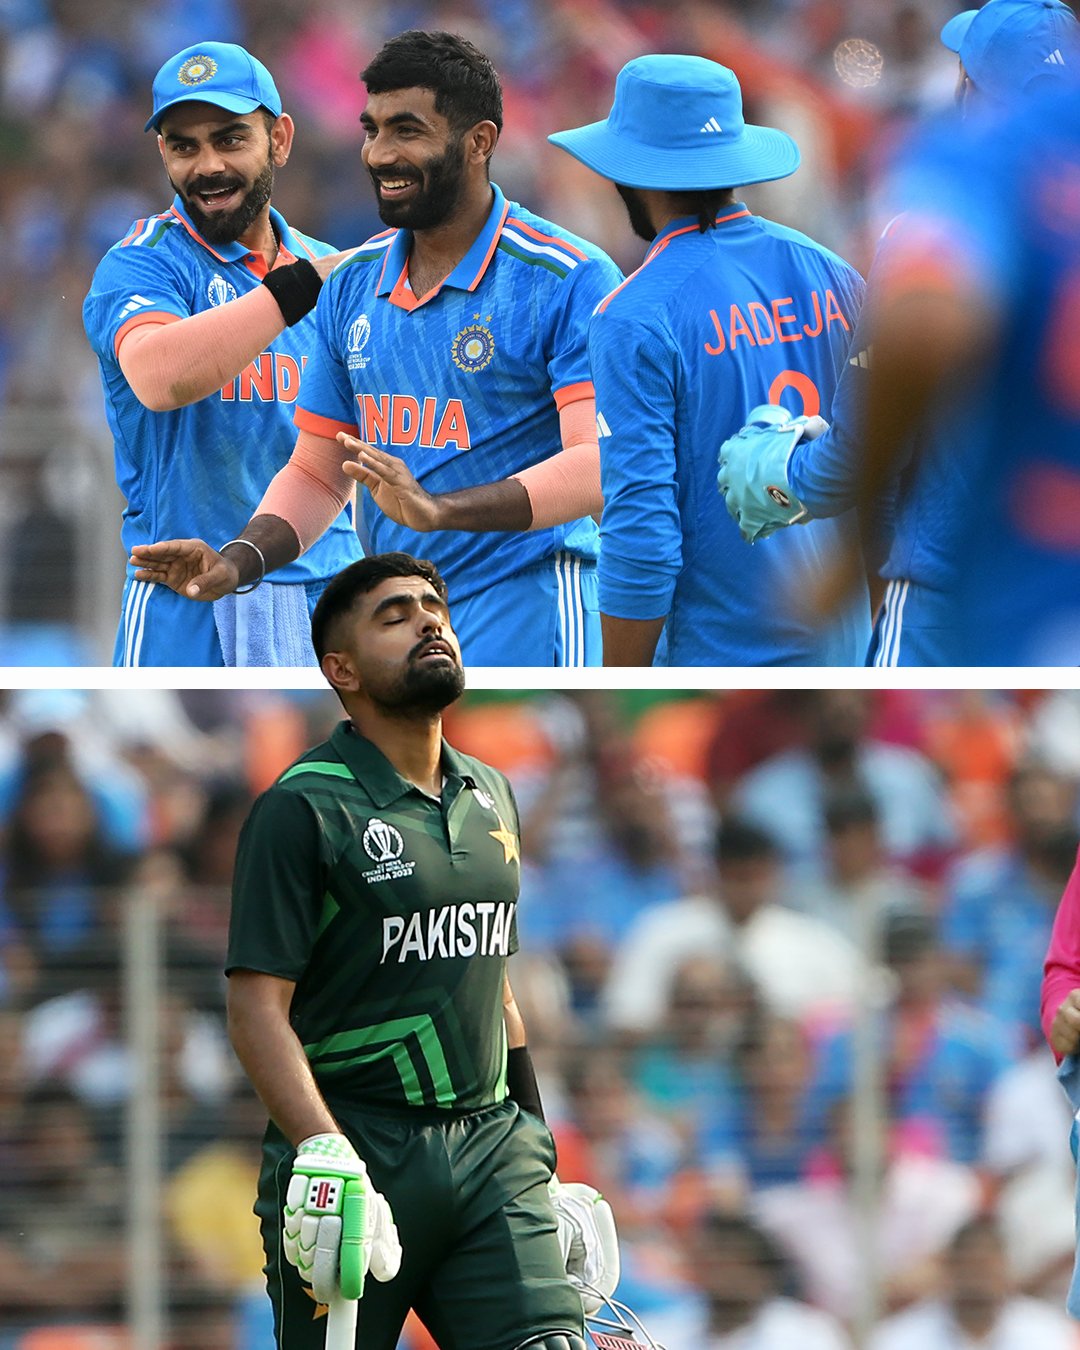 IND vs PAK | Twitter reacts as India’s Rolls Royce-bowling attack trigger shambolic Pakistan collapse in 7-wicket win